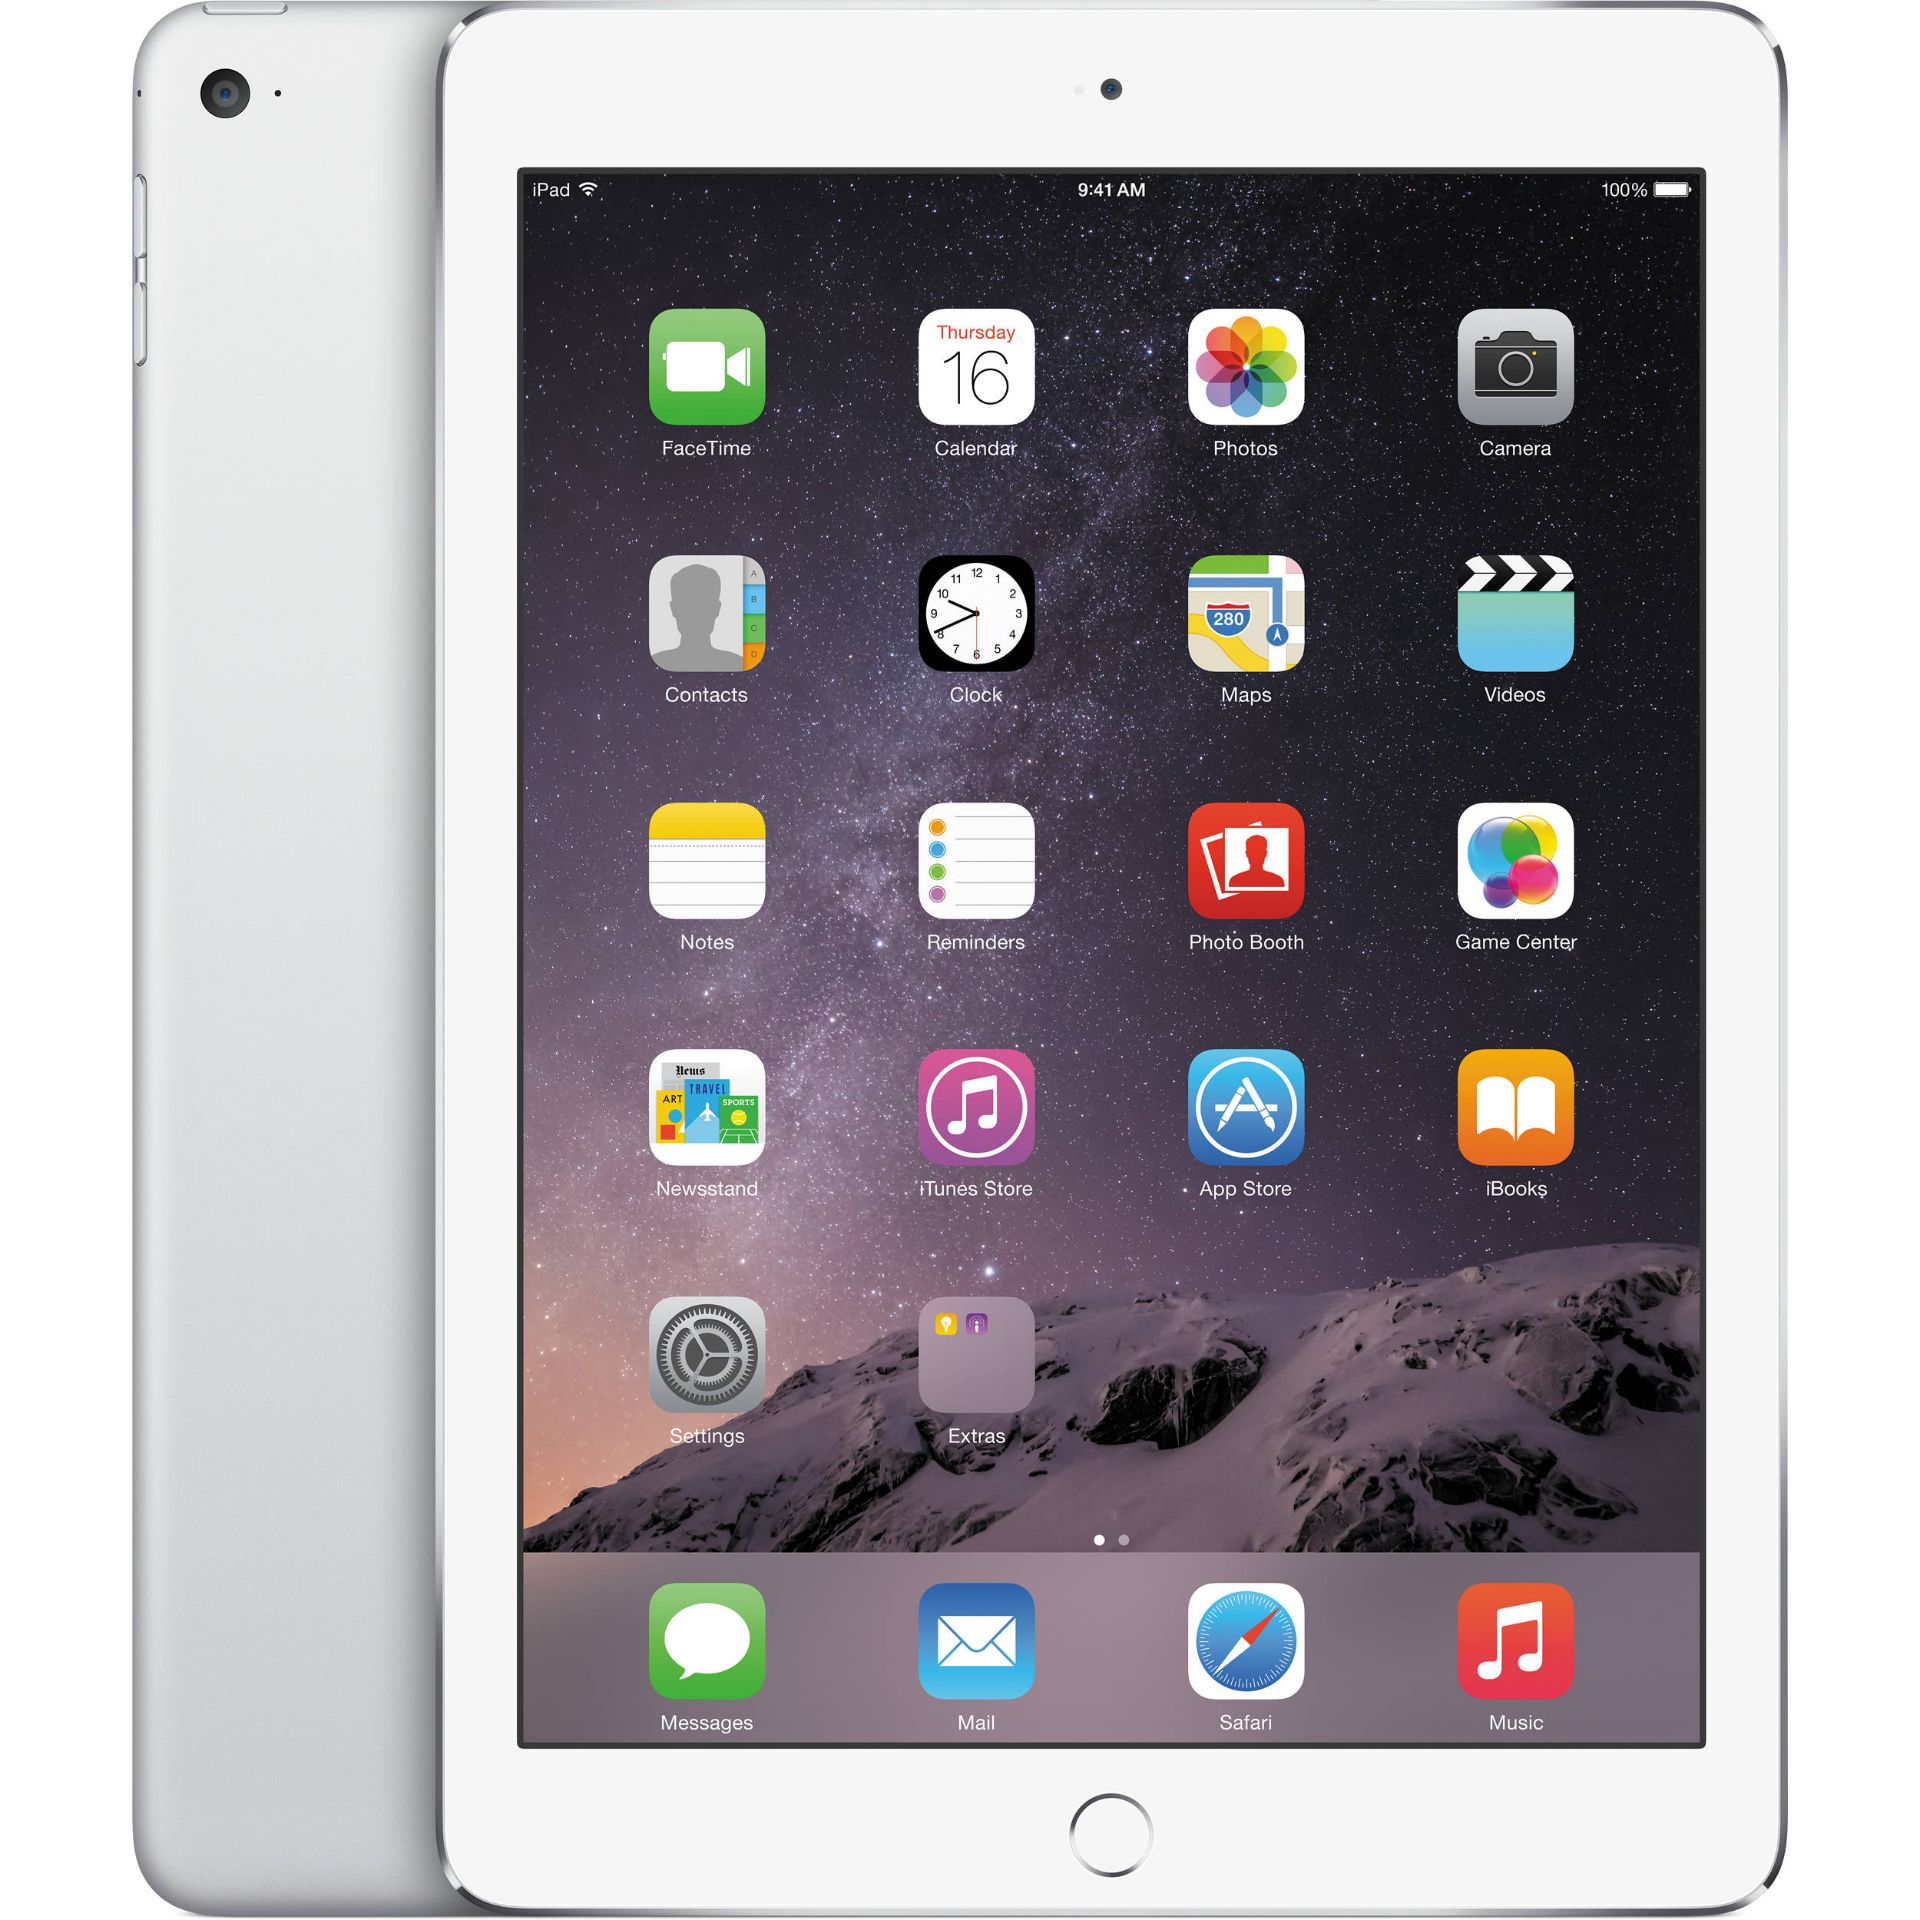 V *TRADE QTY* Grade A Apple iPad Air 2 64GB Silver - Wi-Fi - In Generic Box - With Apple Accessories